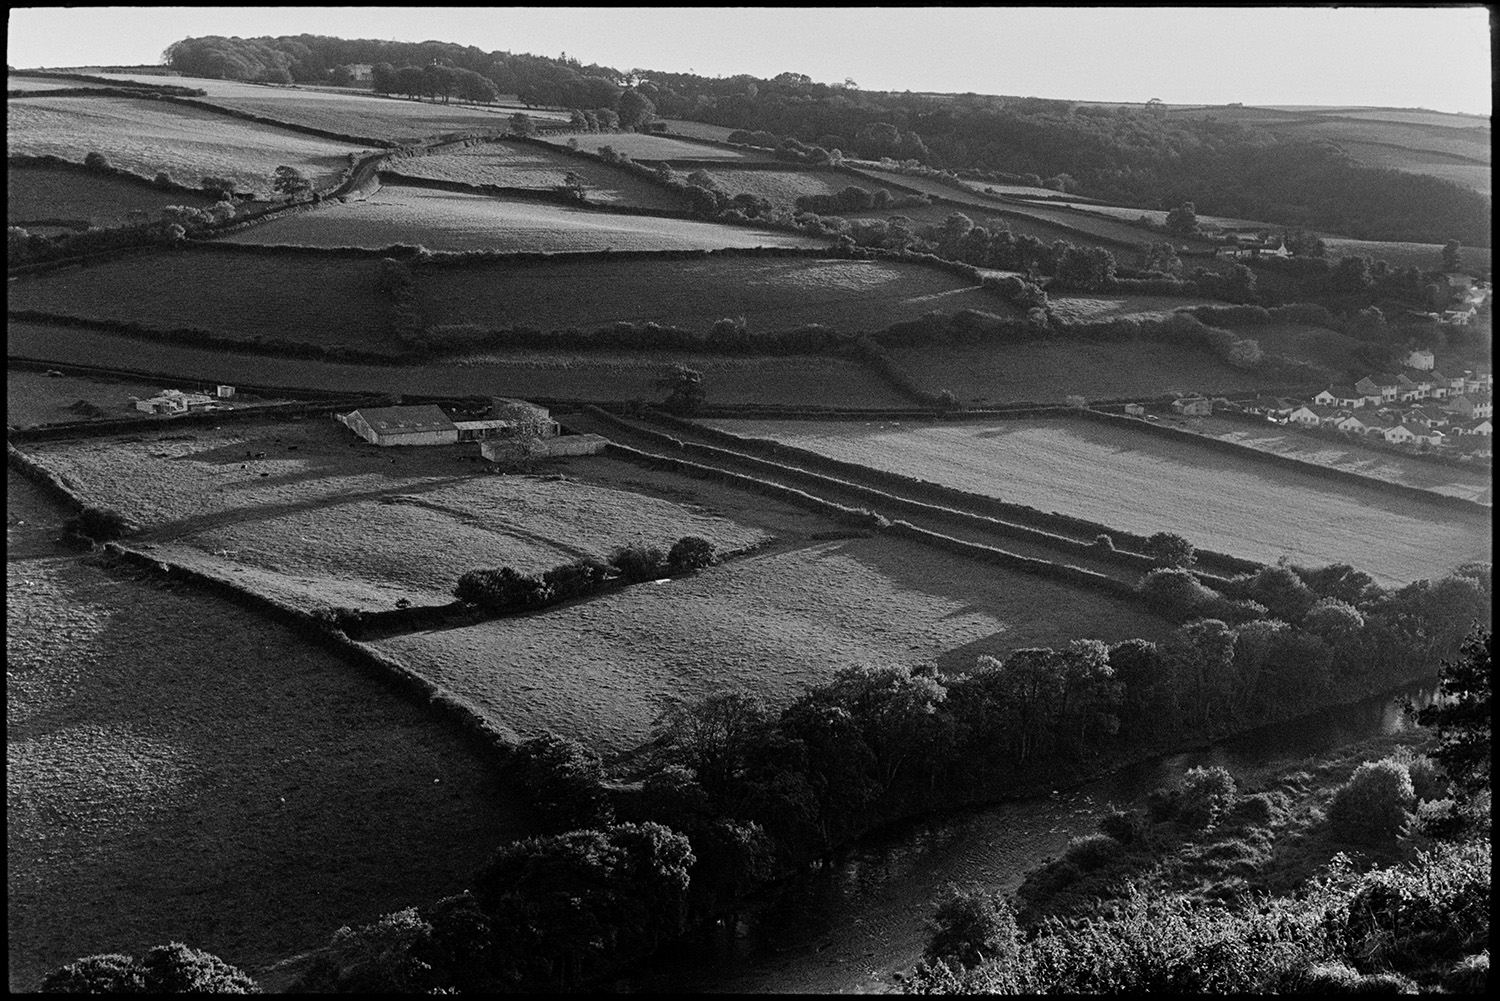 Landscape with ancient strip fields, or leper fields. 
[A landscape of fields, hedges, trees and farm buildings near Torrington. Old strip field can also be seen. The river Torridge is visible at the bottom of the frame.]